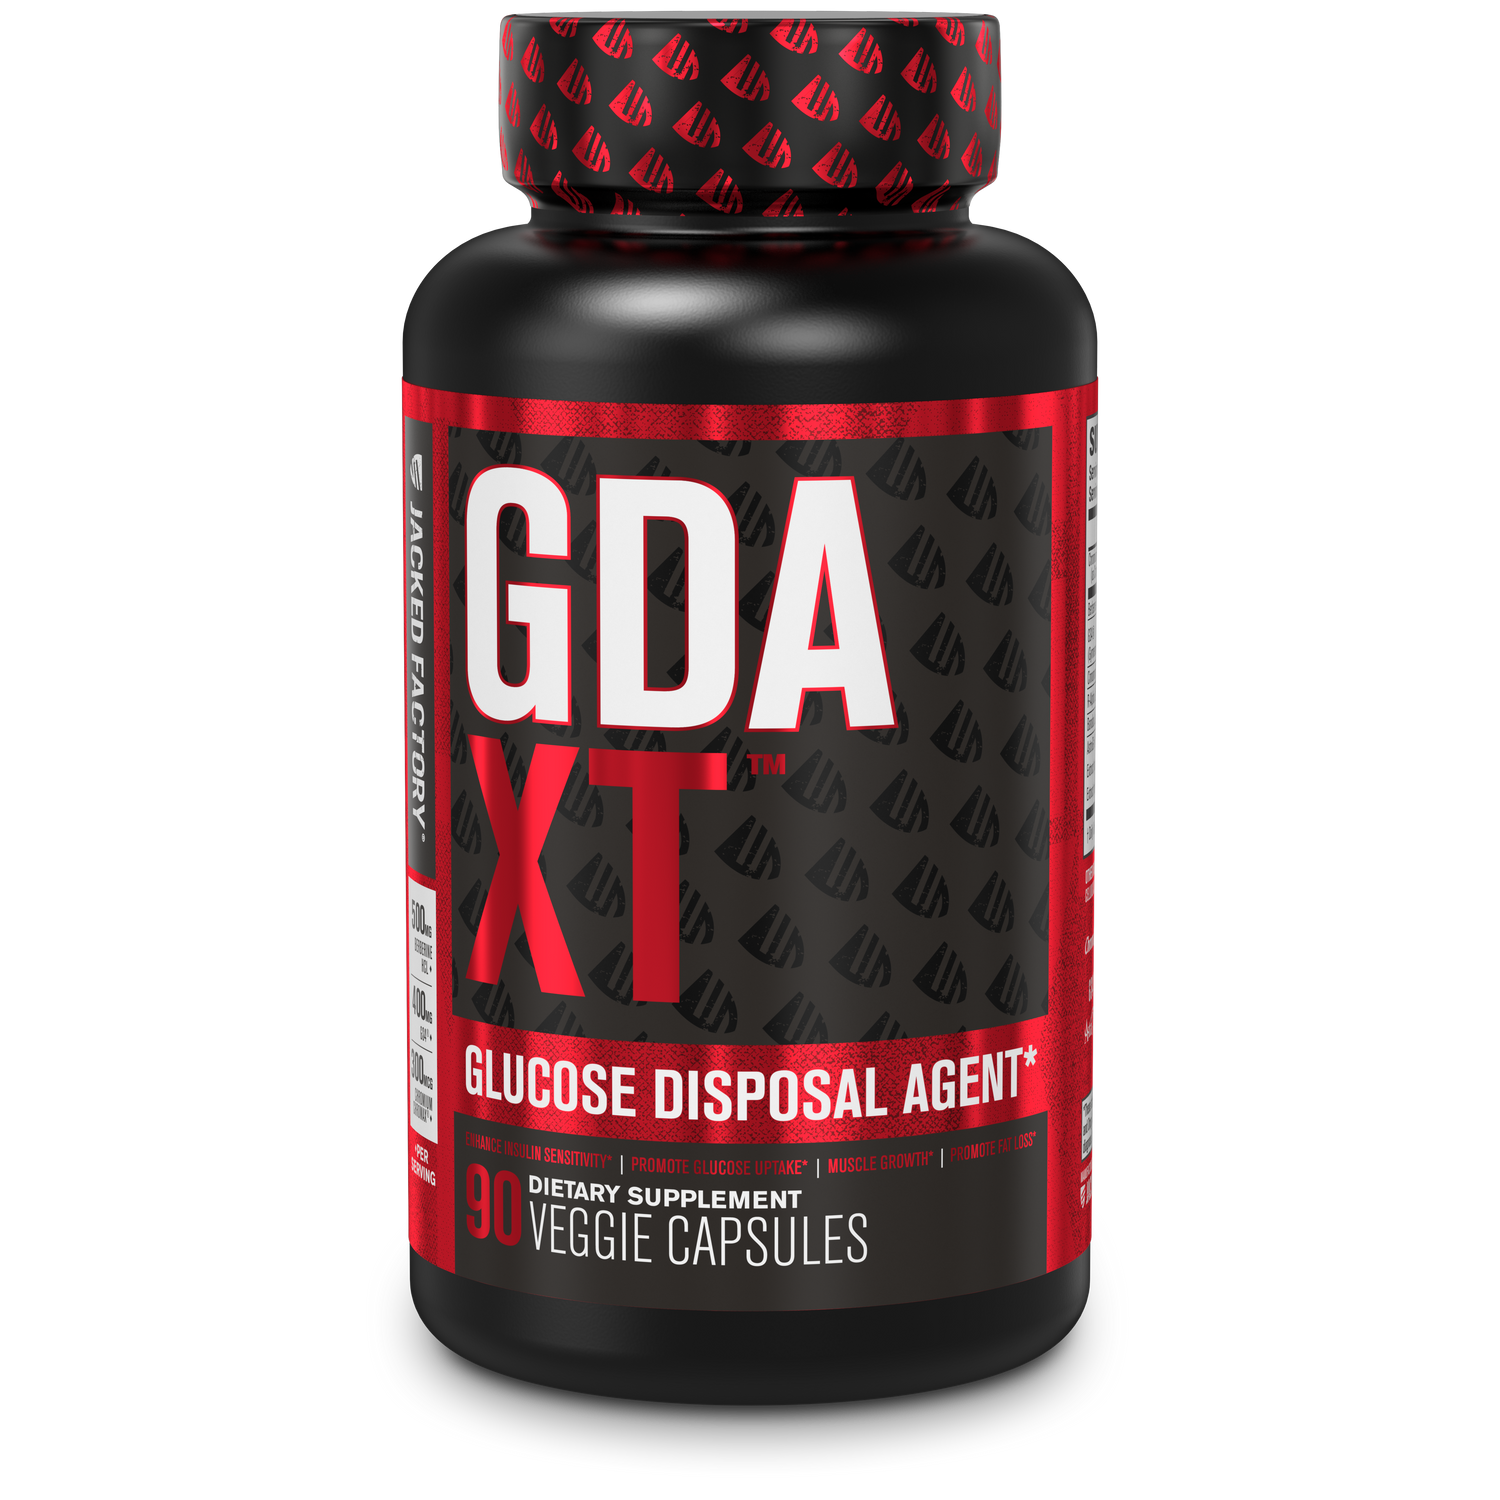 Front of GDA XT (90 capsule) bottle in a black bottle with red and white label